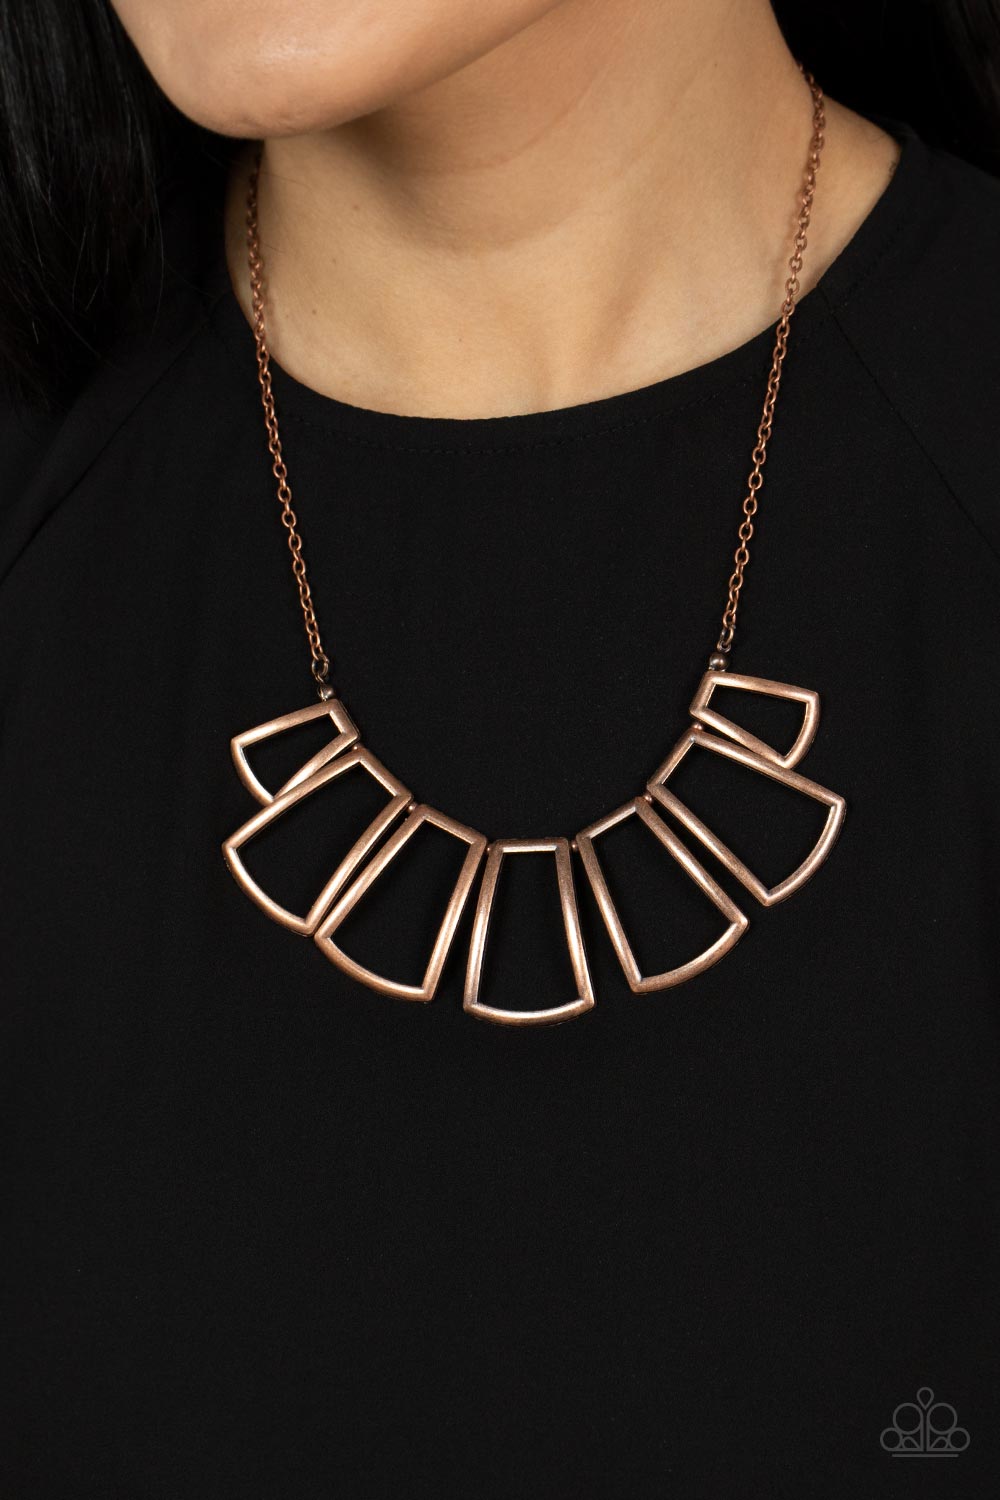 Full-Fledged Framed - Copper Paparazzi Necklace